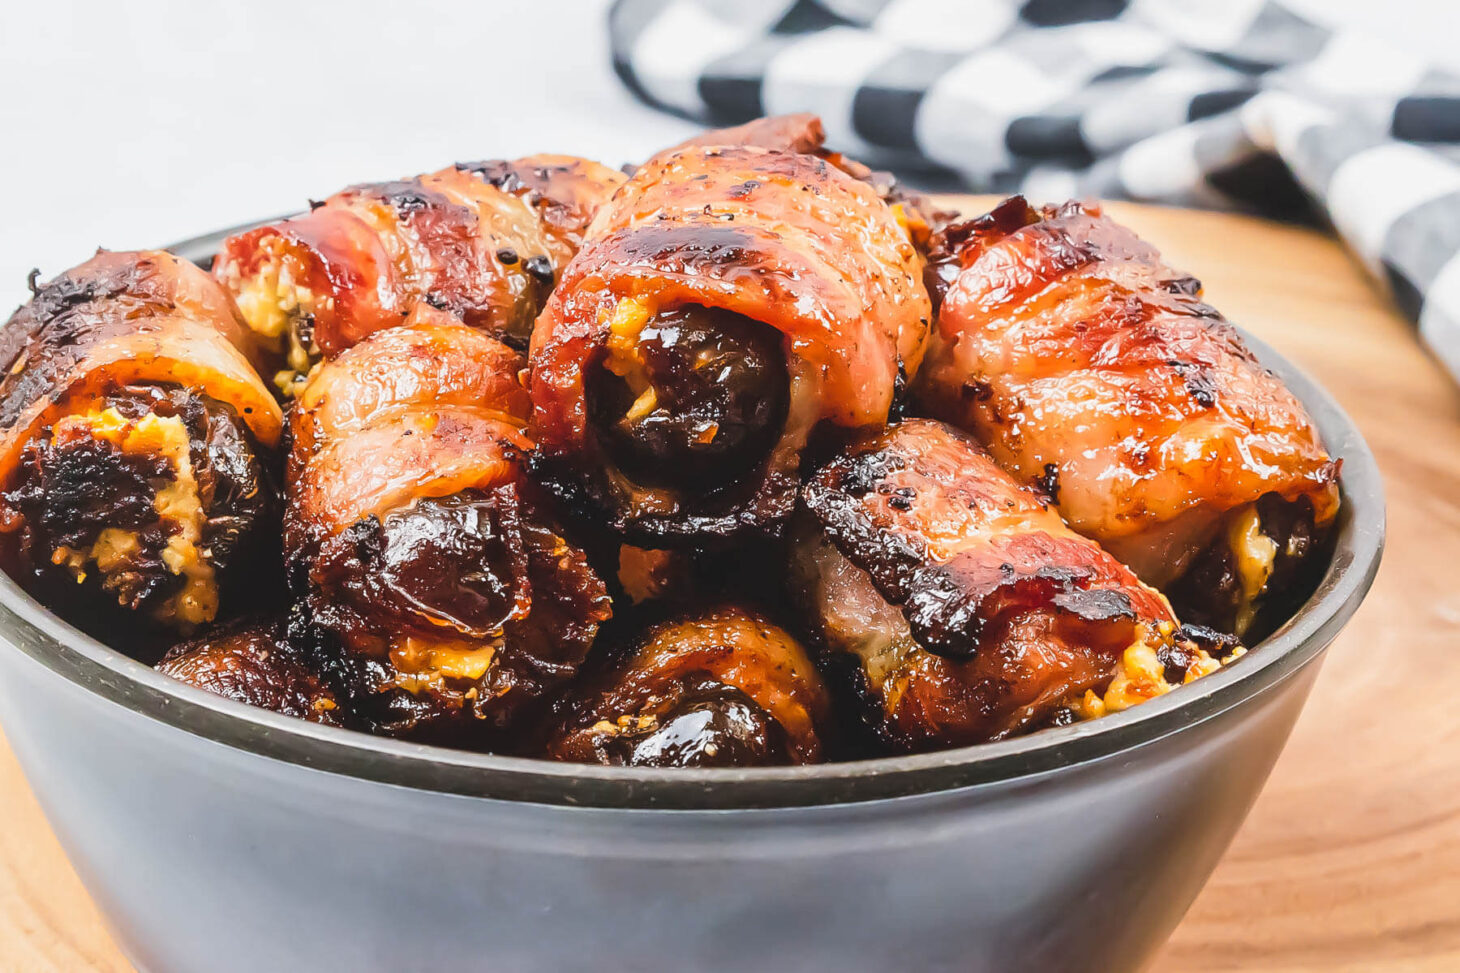 A bowl of glistening bacon wrapped stuffed dates on a wooden board.